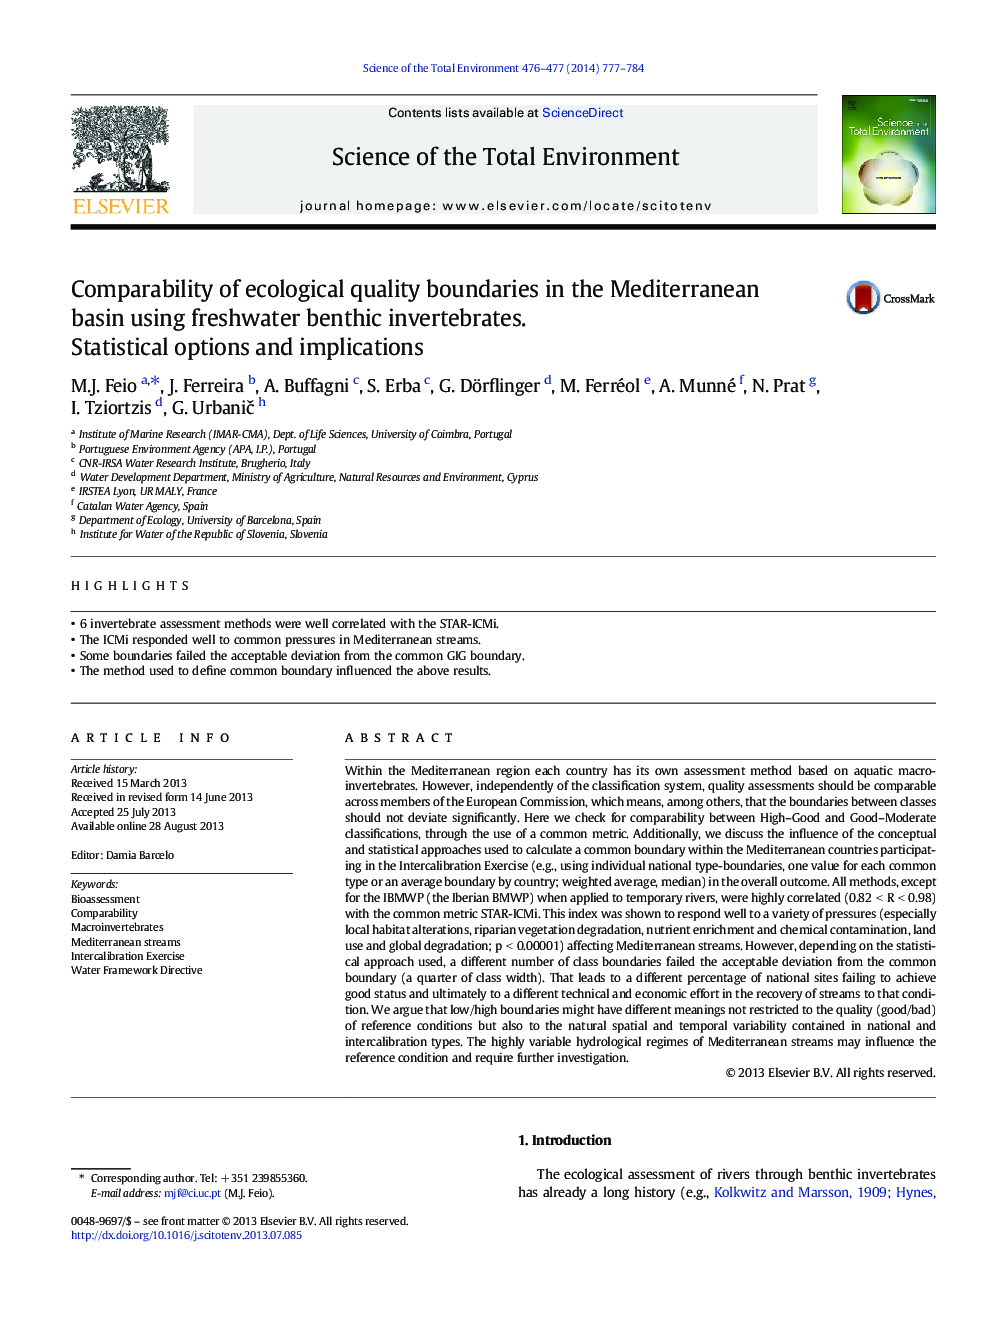 Comparability of ecological quality boundaries in the Mediterranean basin using freshwater benthic invertebrates. Statistical options and implications